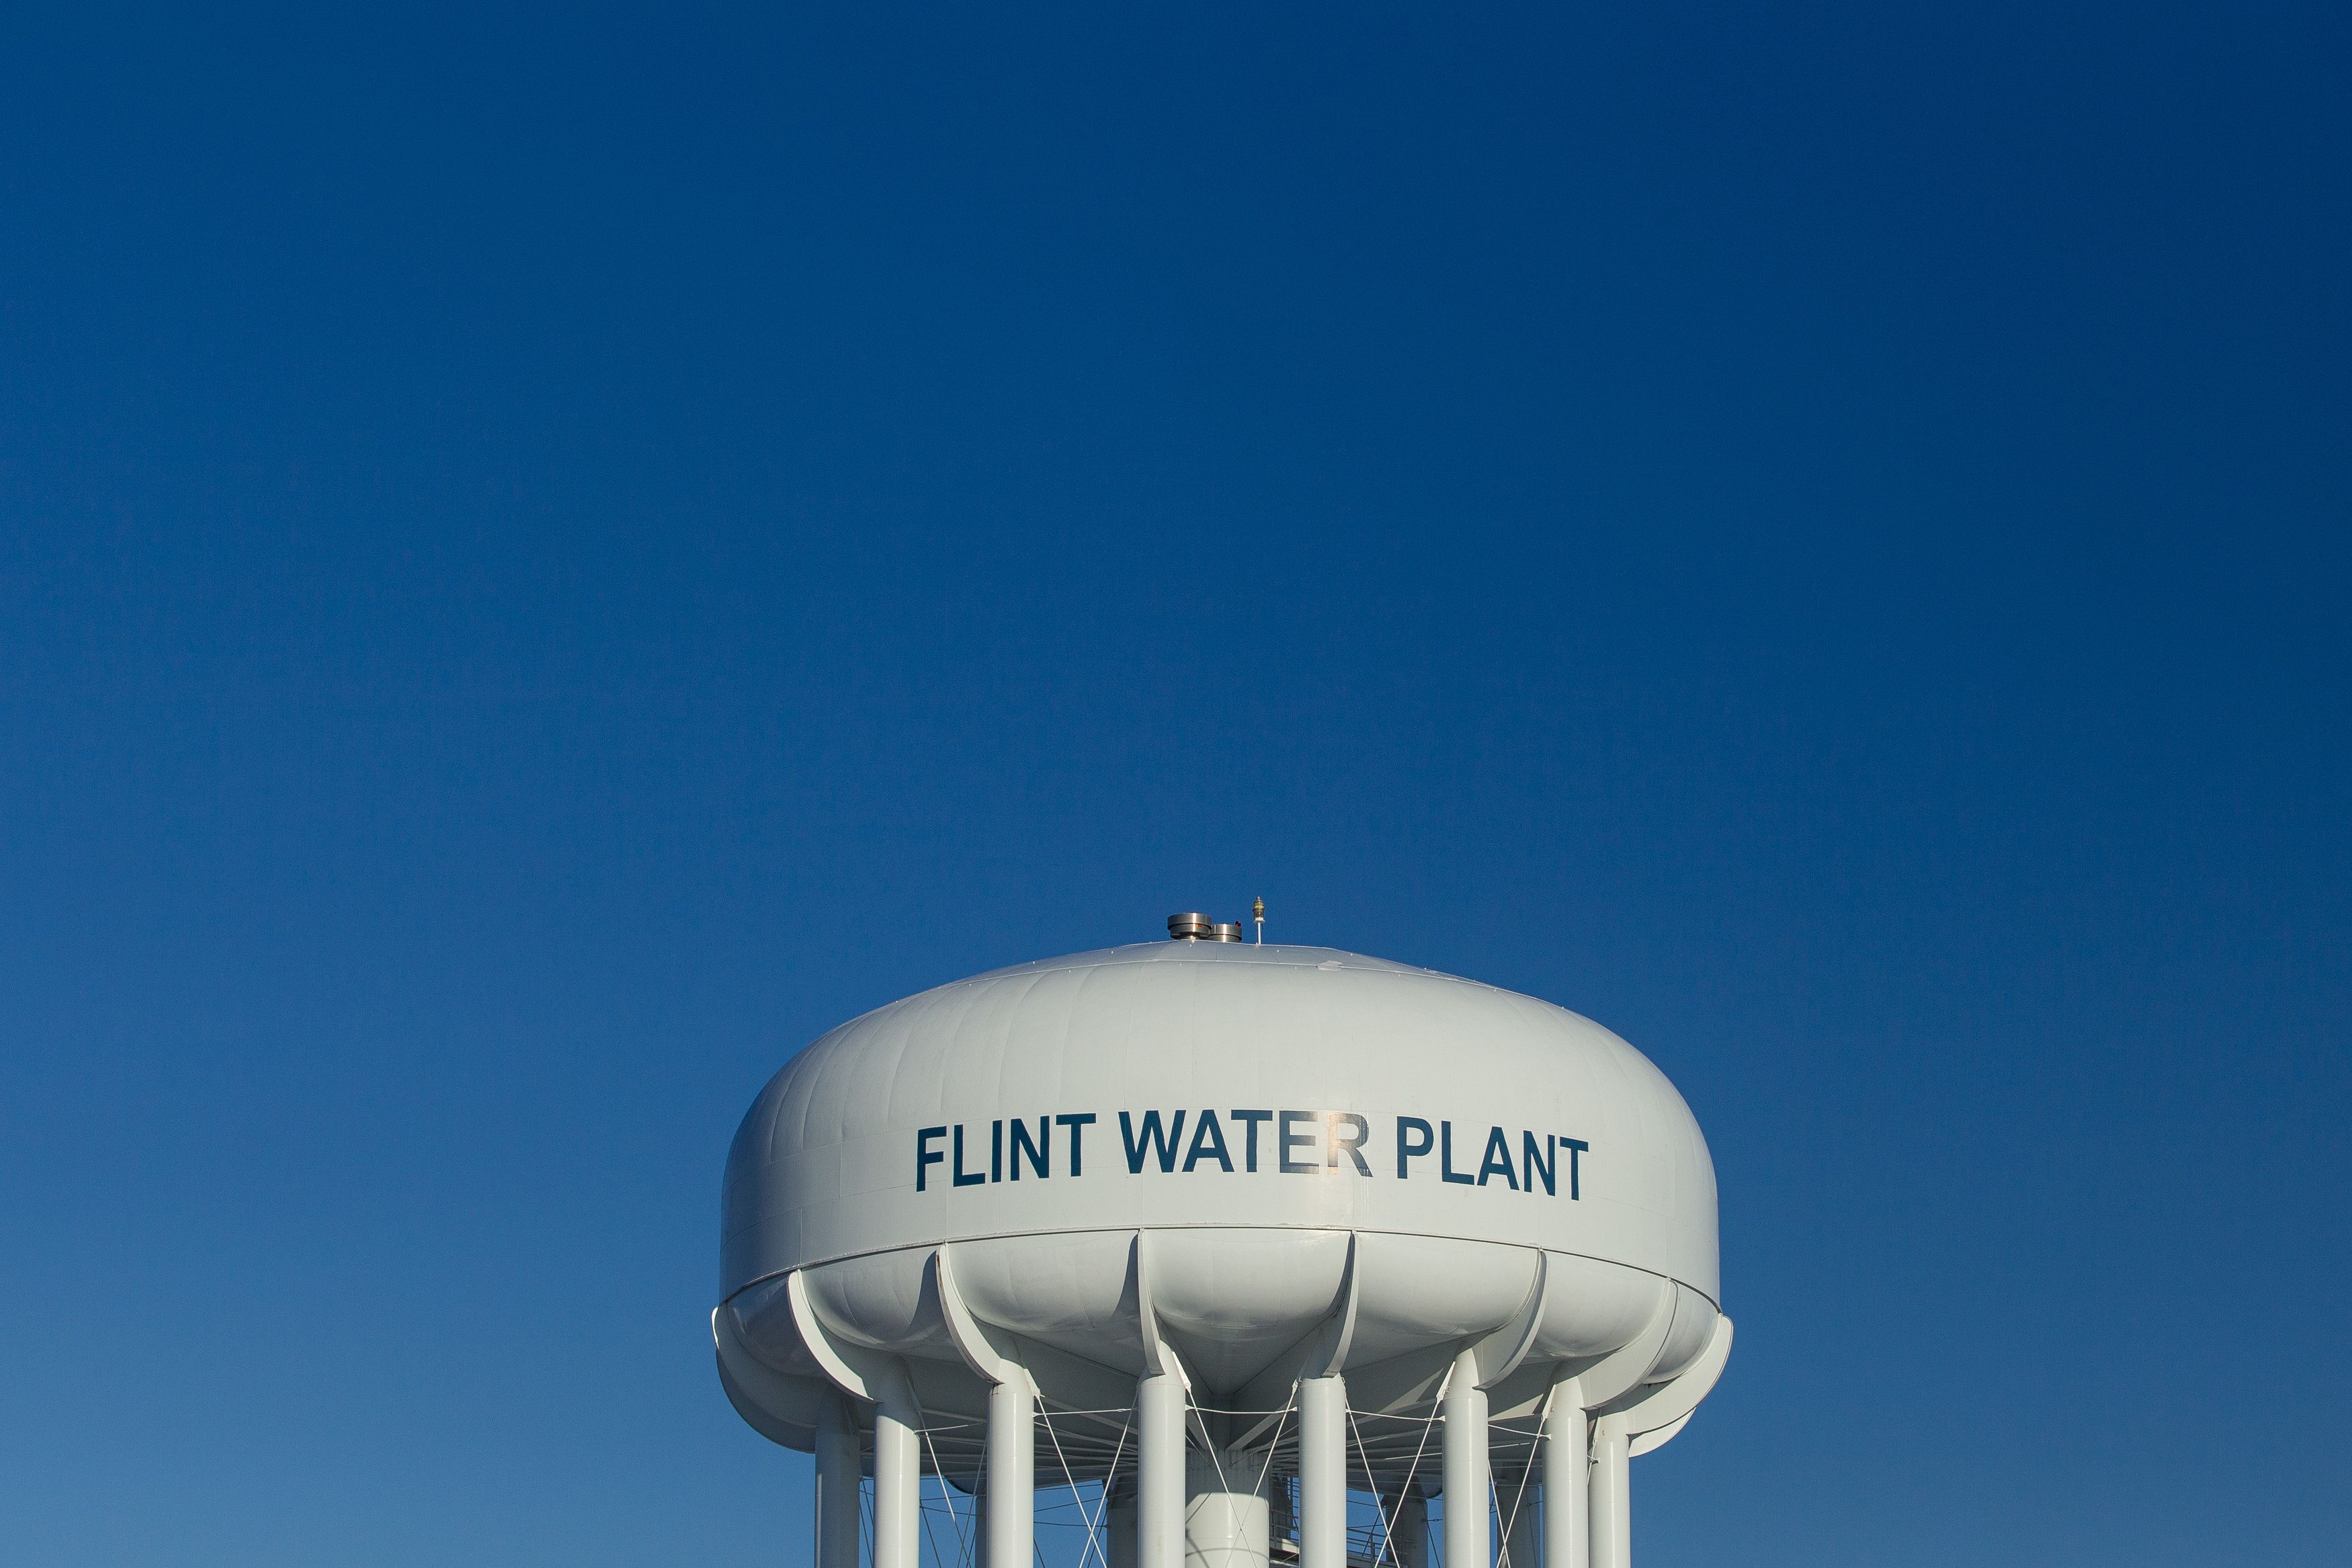 The water tower at the Flint Water Plant in Flint, Michigan,  looms large over the city March 4, 2016 (Geoff Robins — AFP/Getty Images)